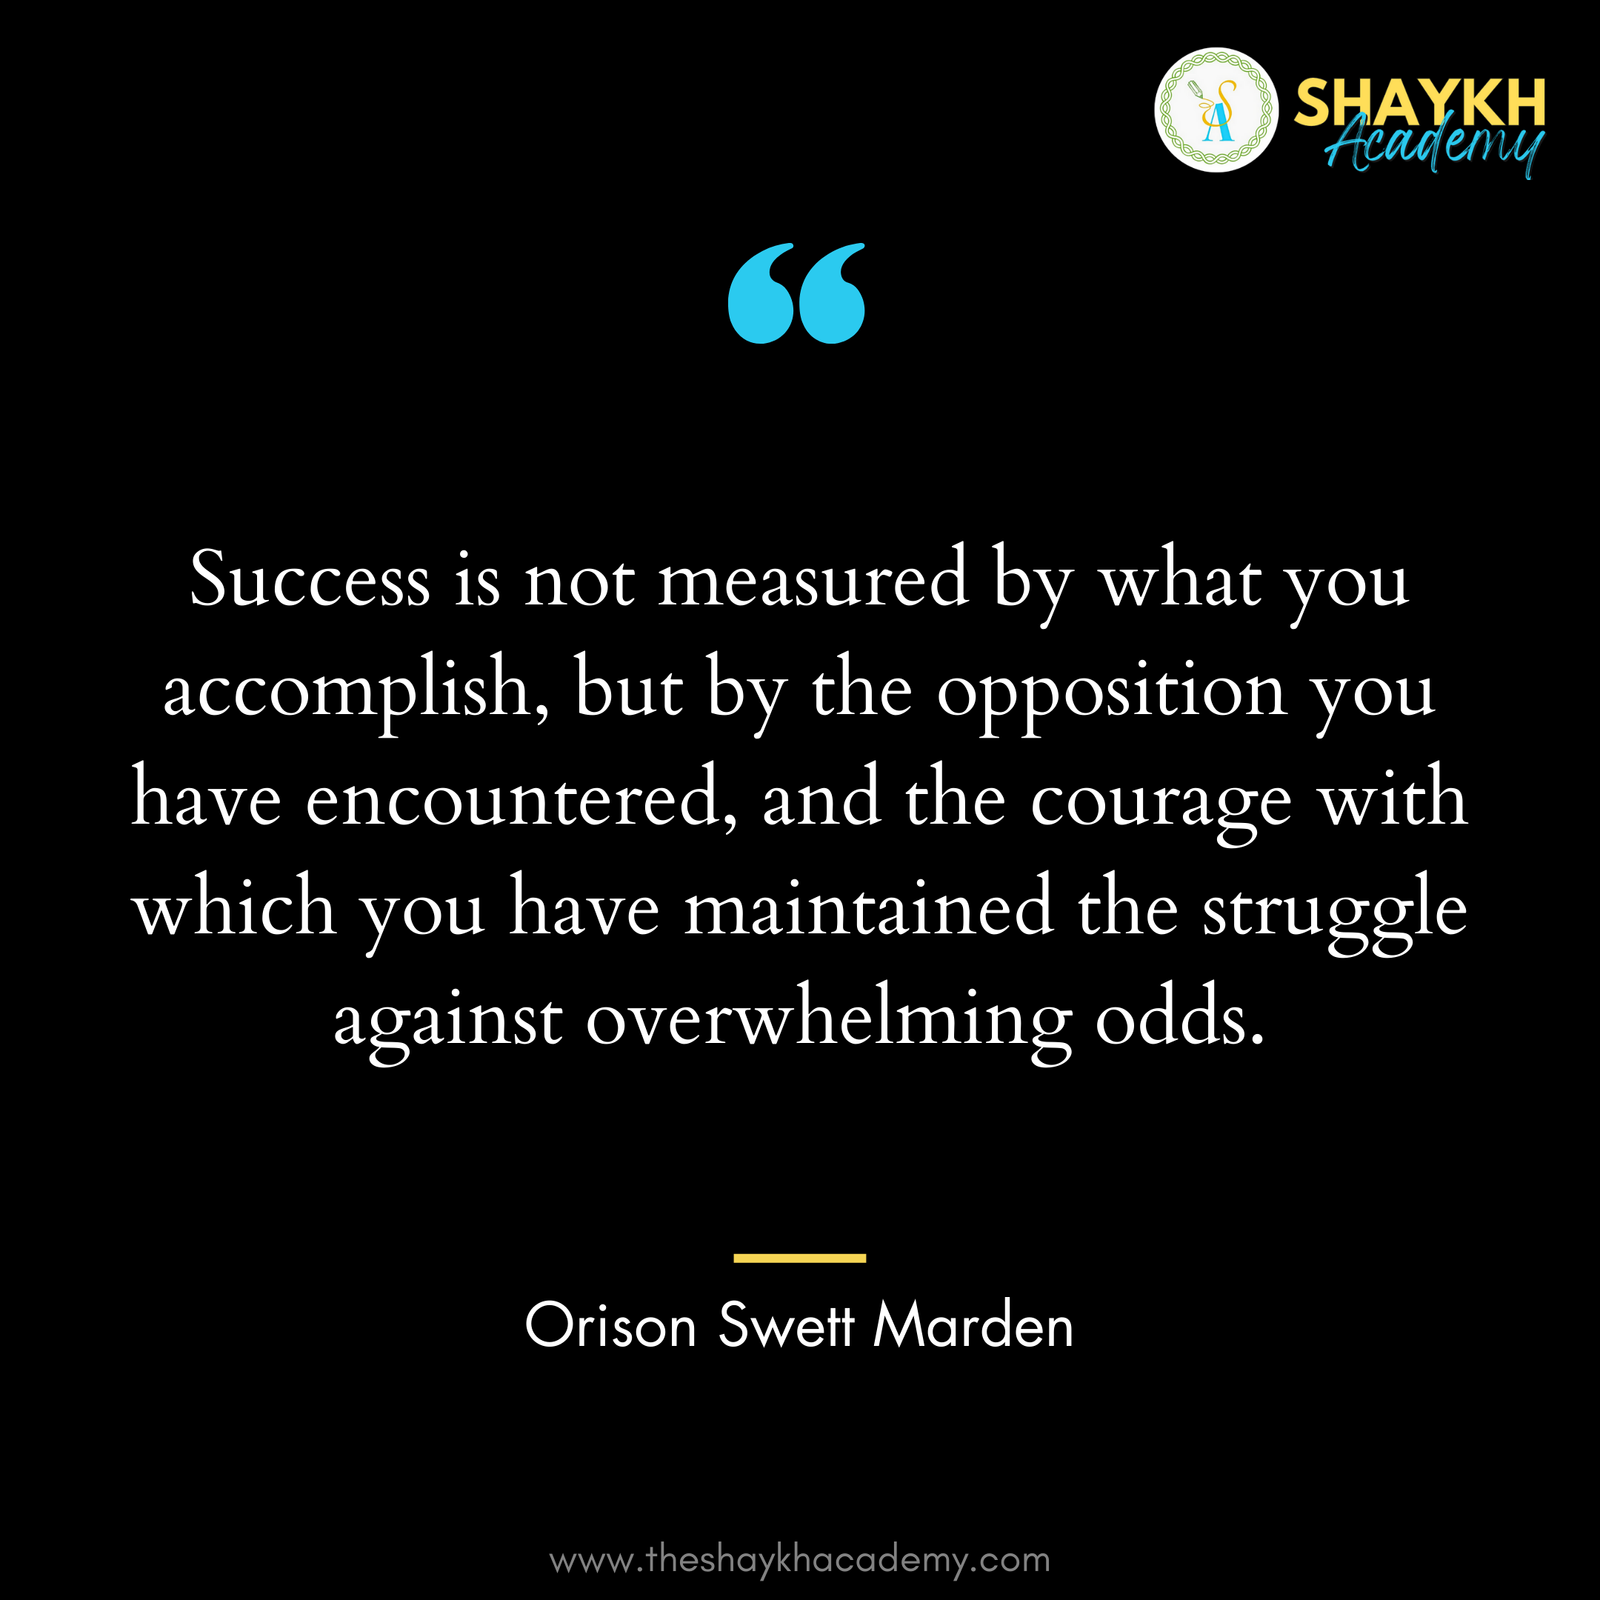 Success is not measured by what you accomplish, but by the opposition you have encountered, and the courage with which you have maintained the struggle against overwhelming odds